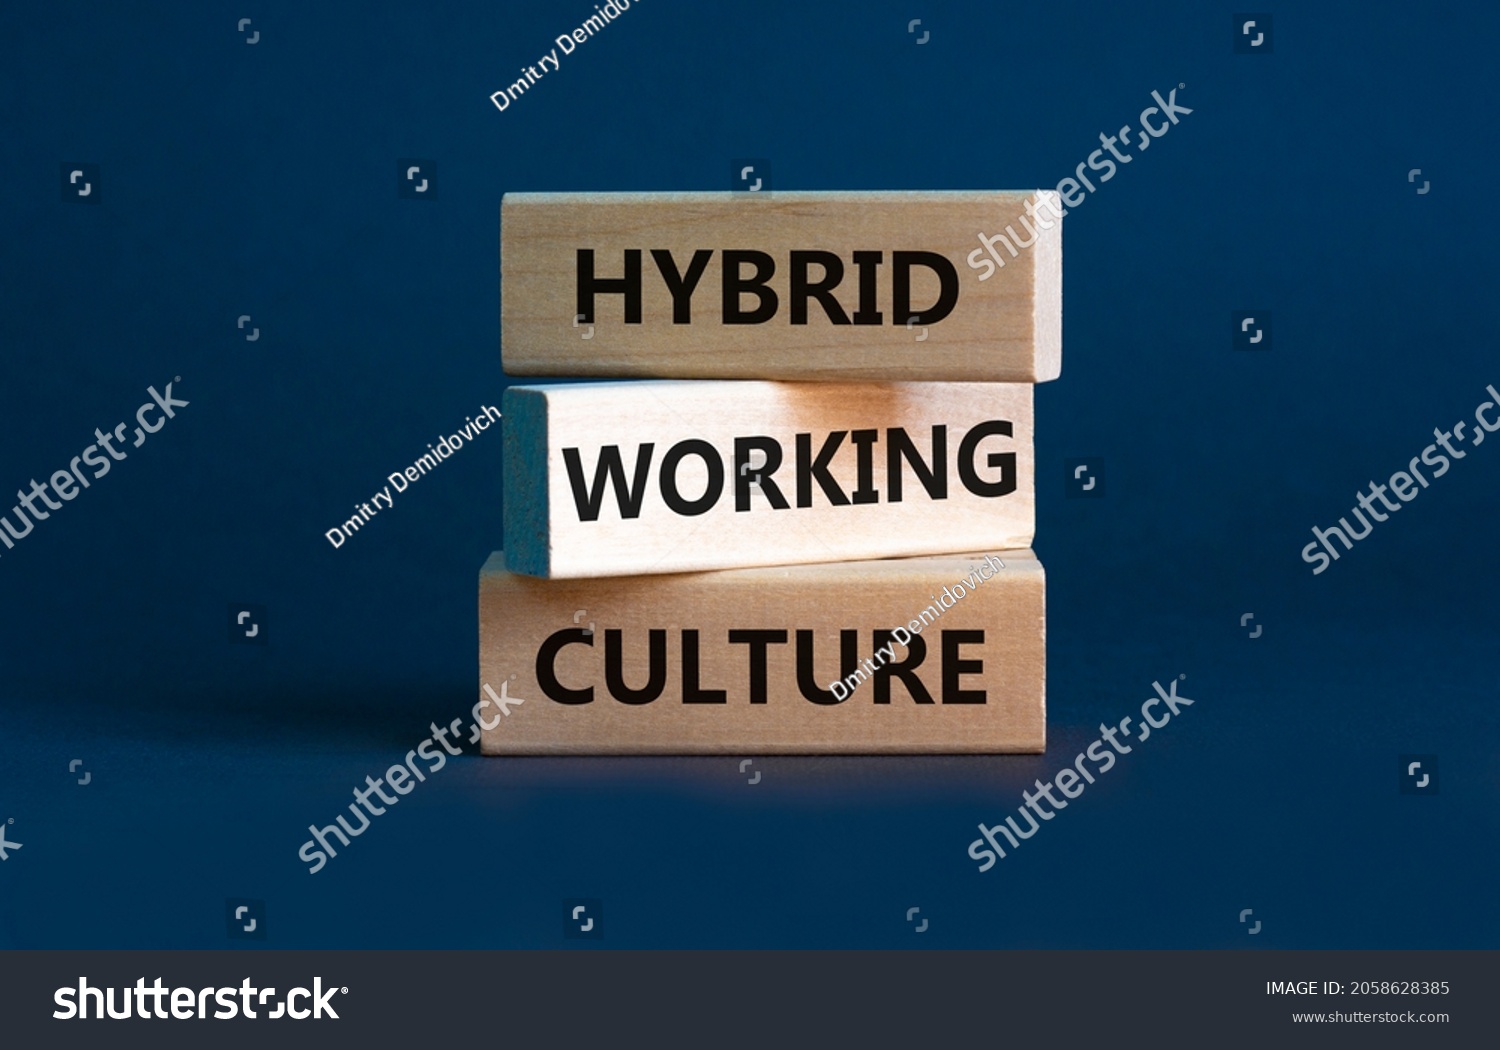 Hybrid working culture symbol. Concept words 'hybrid working culture'. Beautiful grey background. Business and hybrid working culture concept, copy space. #2058628385